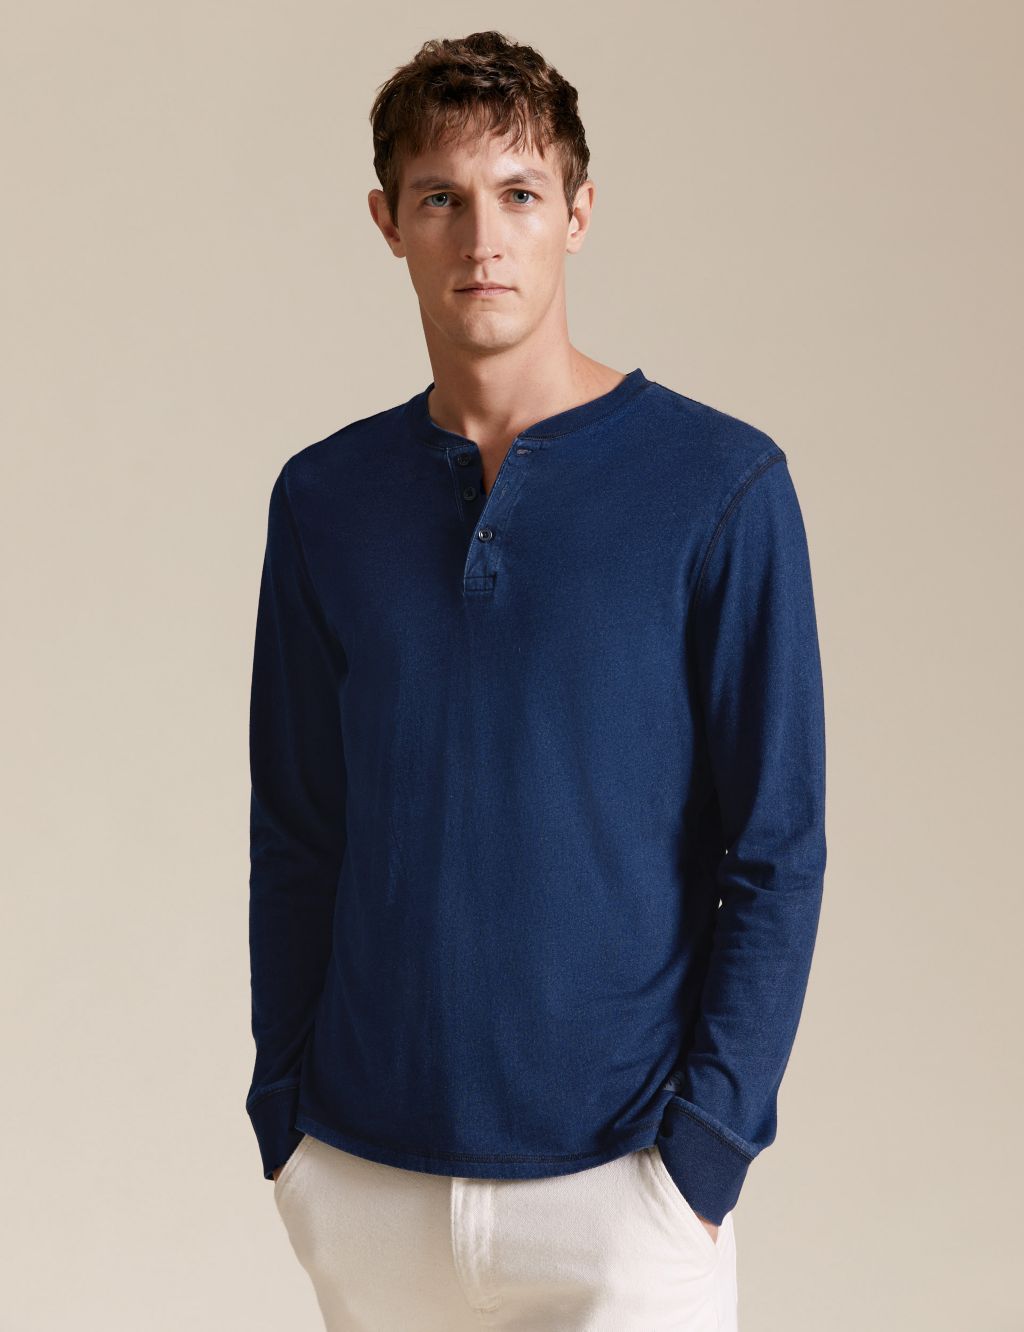 Wetherby Pure Cotton Henley T-Shirt image 1